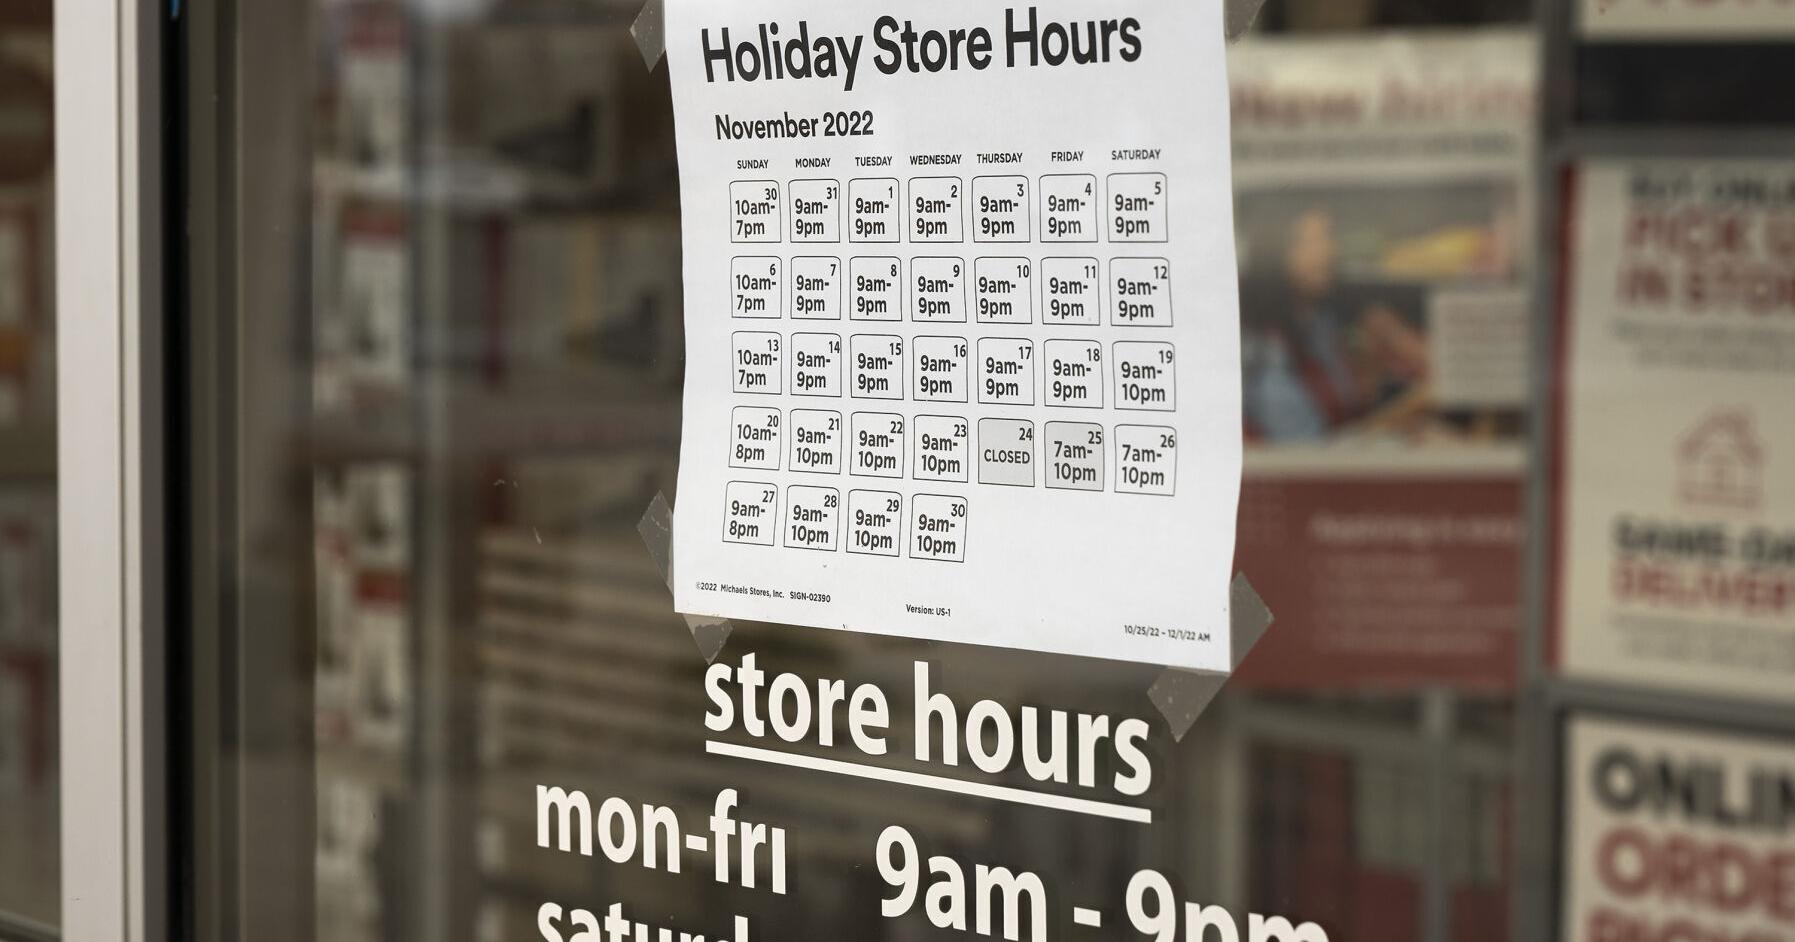 Big-box stores upend traditional Black Friday door-busters in favor of 'Black Friday Month'